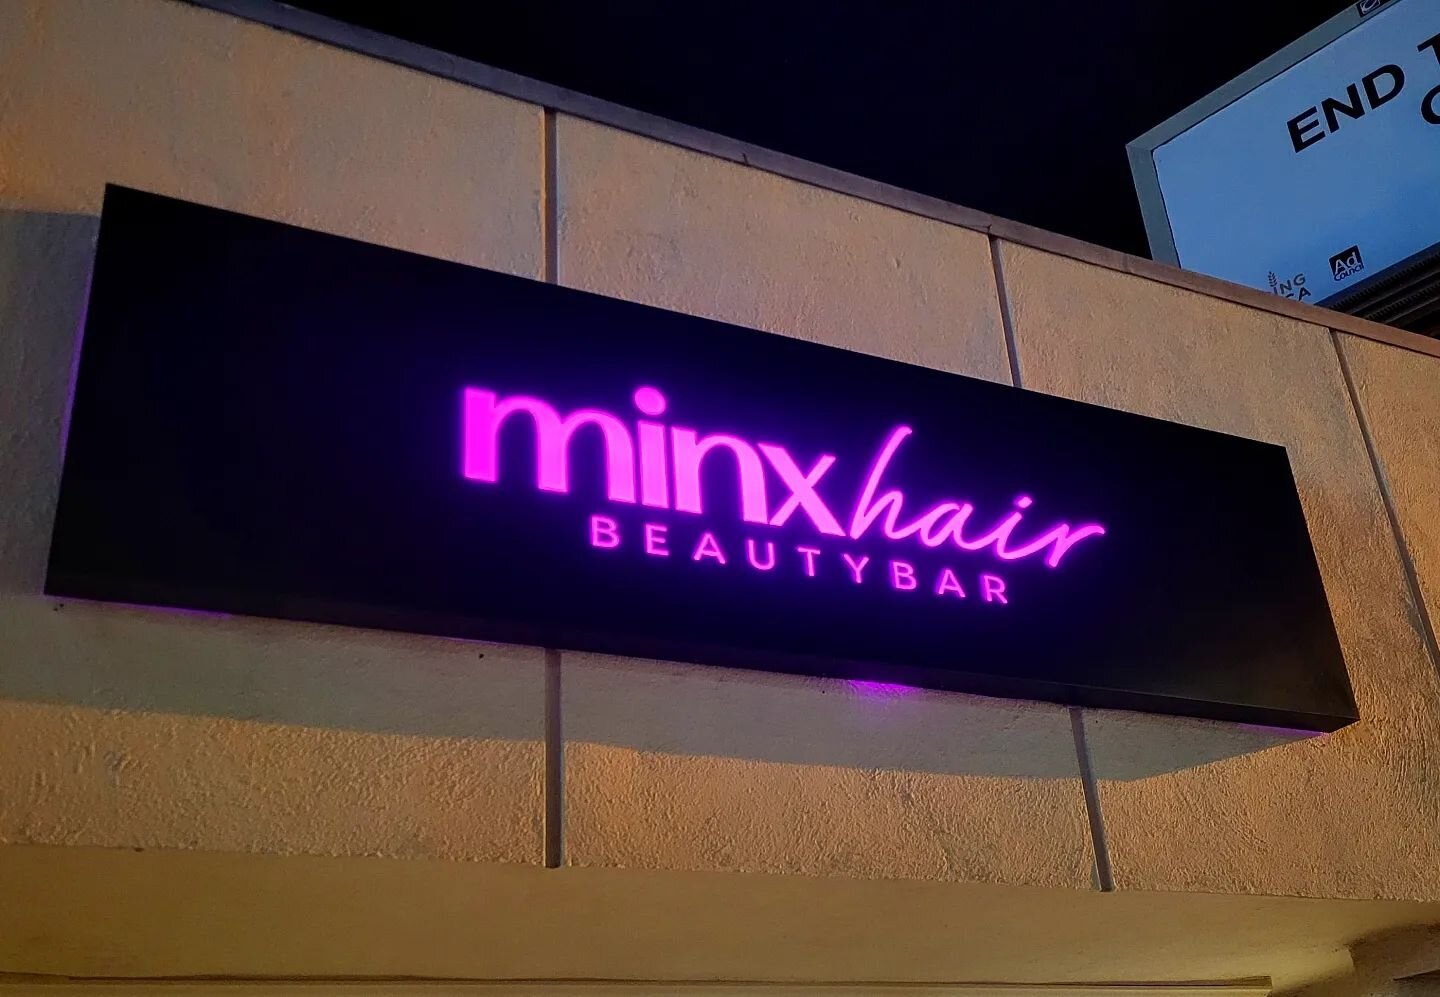 We Make Beautiful Signs!
Cut Through Aluminum  Lightbox Sign installed for @minxhaircollection 

#signs #signage #lightboxsign #cabinetsign #illuminatedsigns #signinstallation #storesign #businesssigns #pinklight #pinkled #spa #beauty #beautyspa #bea